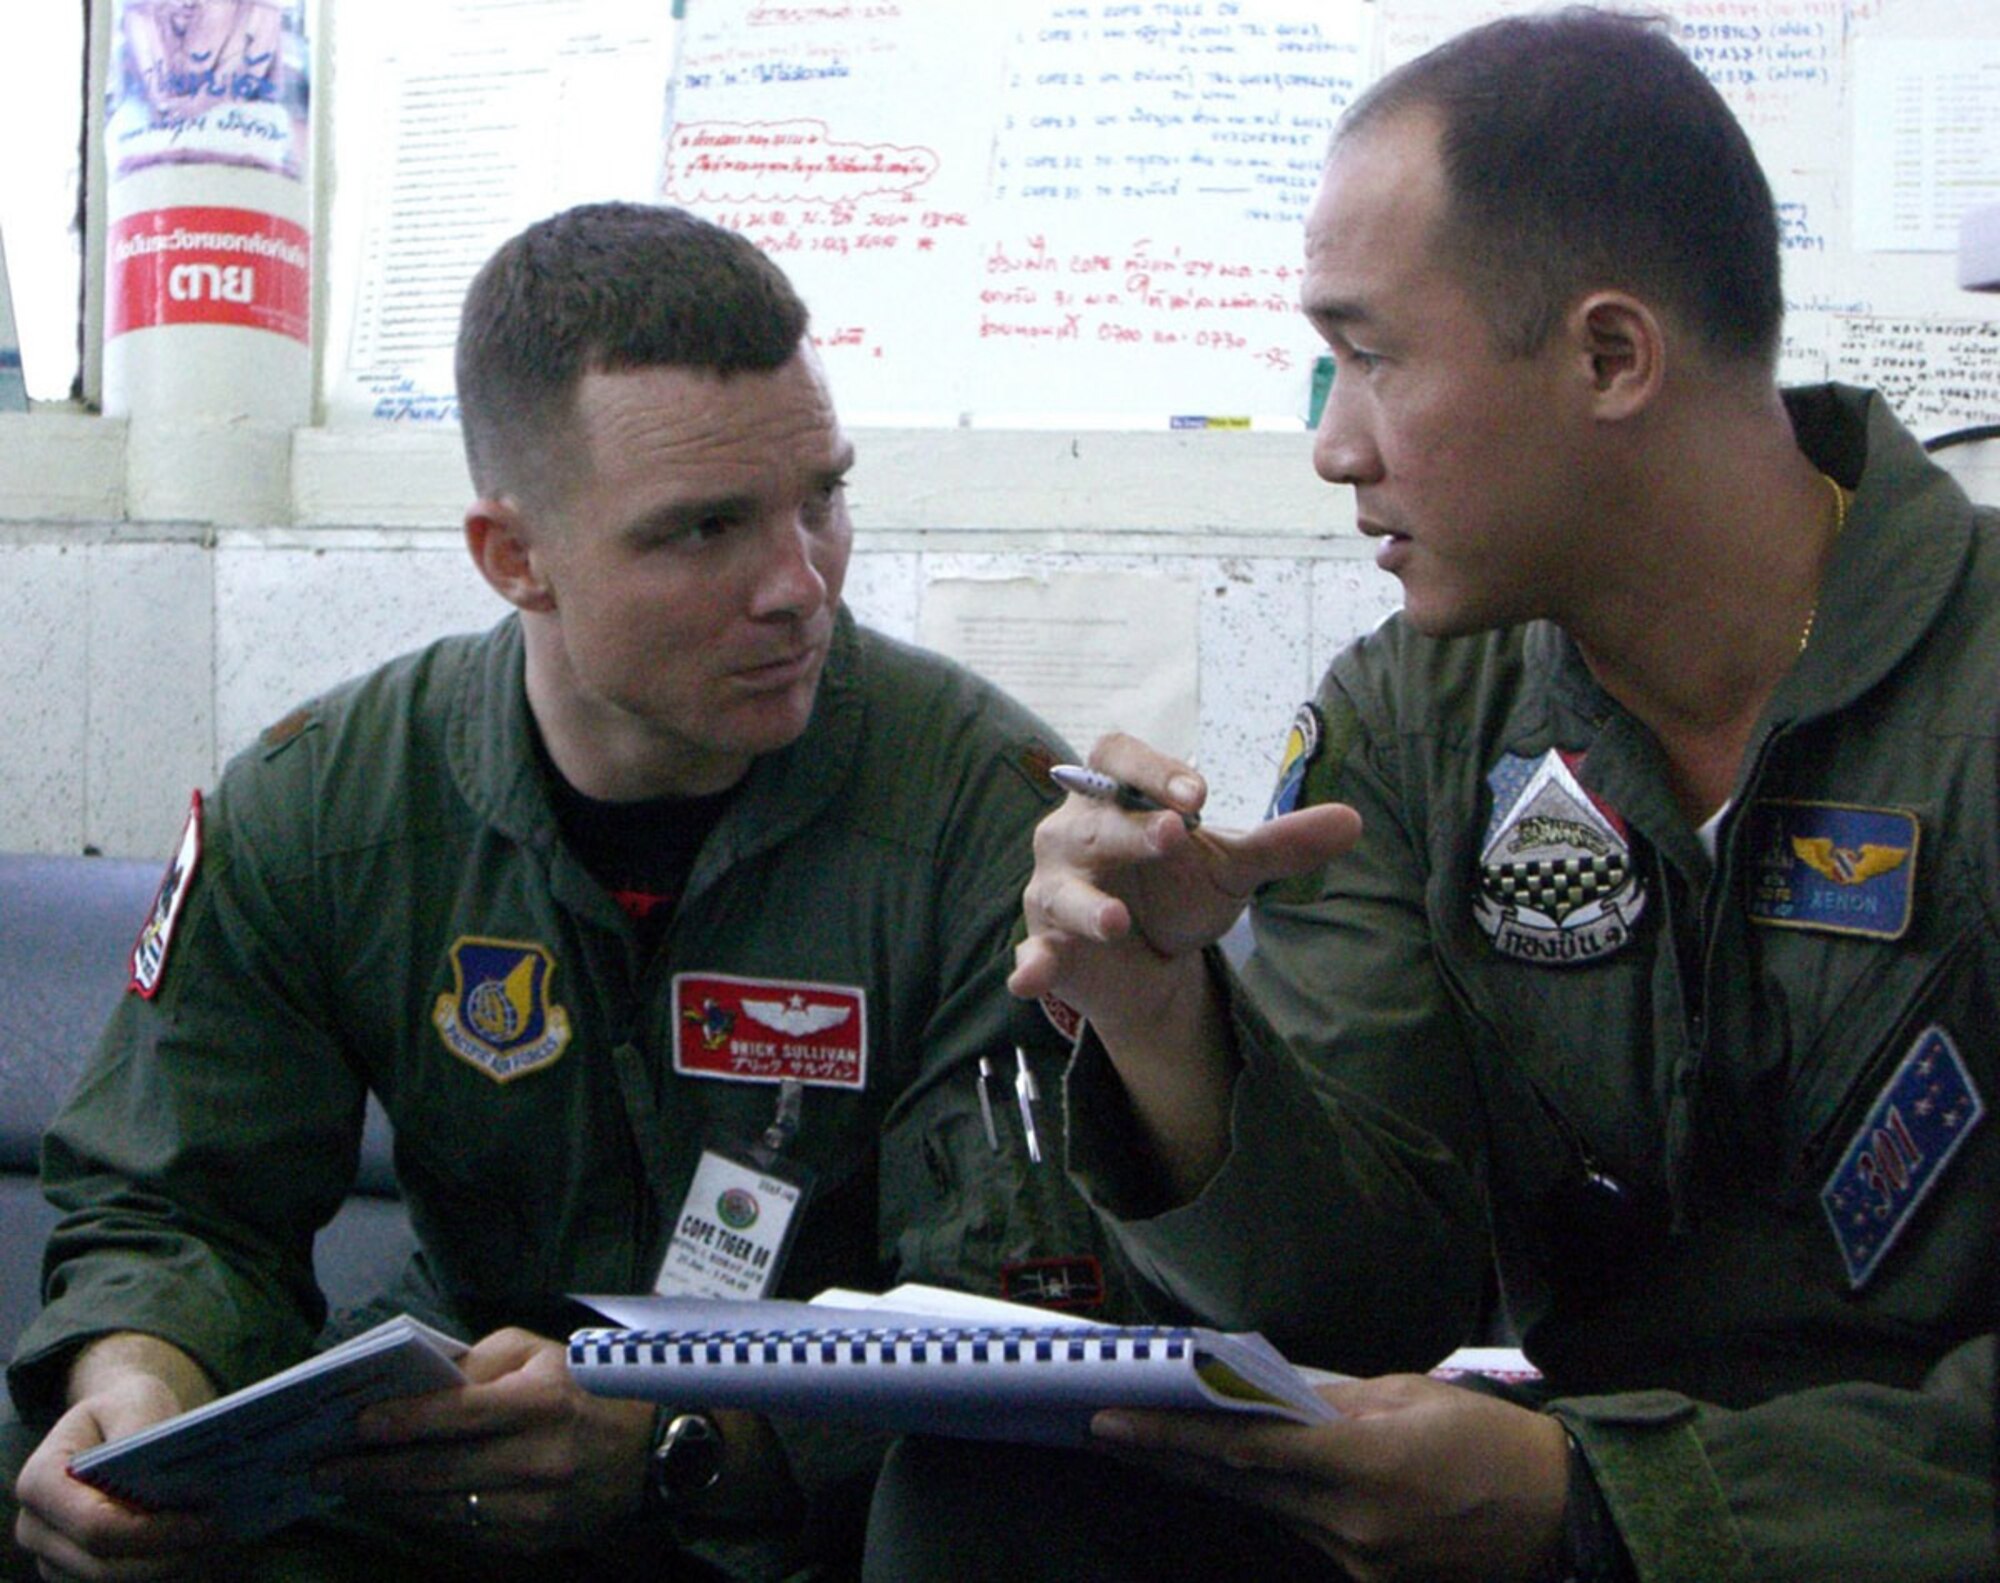 Maj. Sean Sullivan discusses air traffic procedures with Royal Thai air force Maj. Tapanon Dhanamon Jan. 27 at Korat Royal Air Base, Thailand. Cope Tiger 2008 is a multilateral joint and combined field training and humanitarian and civic assistance exercise involving Thailand, Singapore and the United States. The Thai-, Singaporean- and U.S.-hosted exercise enhances combined readiness and interoperability, reinforces U.S. commitment to the Southeast Asian region, and demonstrates the U.S. capability to project combined and joint forces strategically in a multilateral environment. Major Sullivan is the mission director of flying operations for Exercise Cope Tiger 2008, and Major Dhanamon is a Royal Thai air force F-16 pilot. (U.S. Air Force photo/Capt. Renee Lee) 
